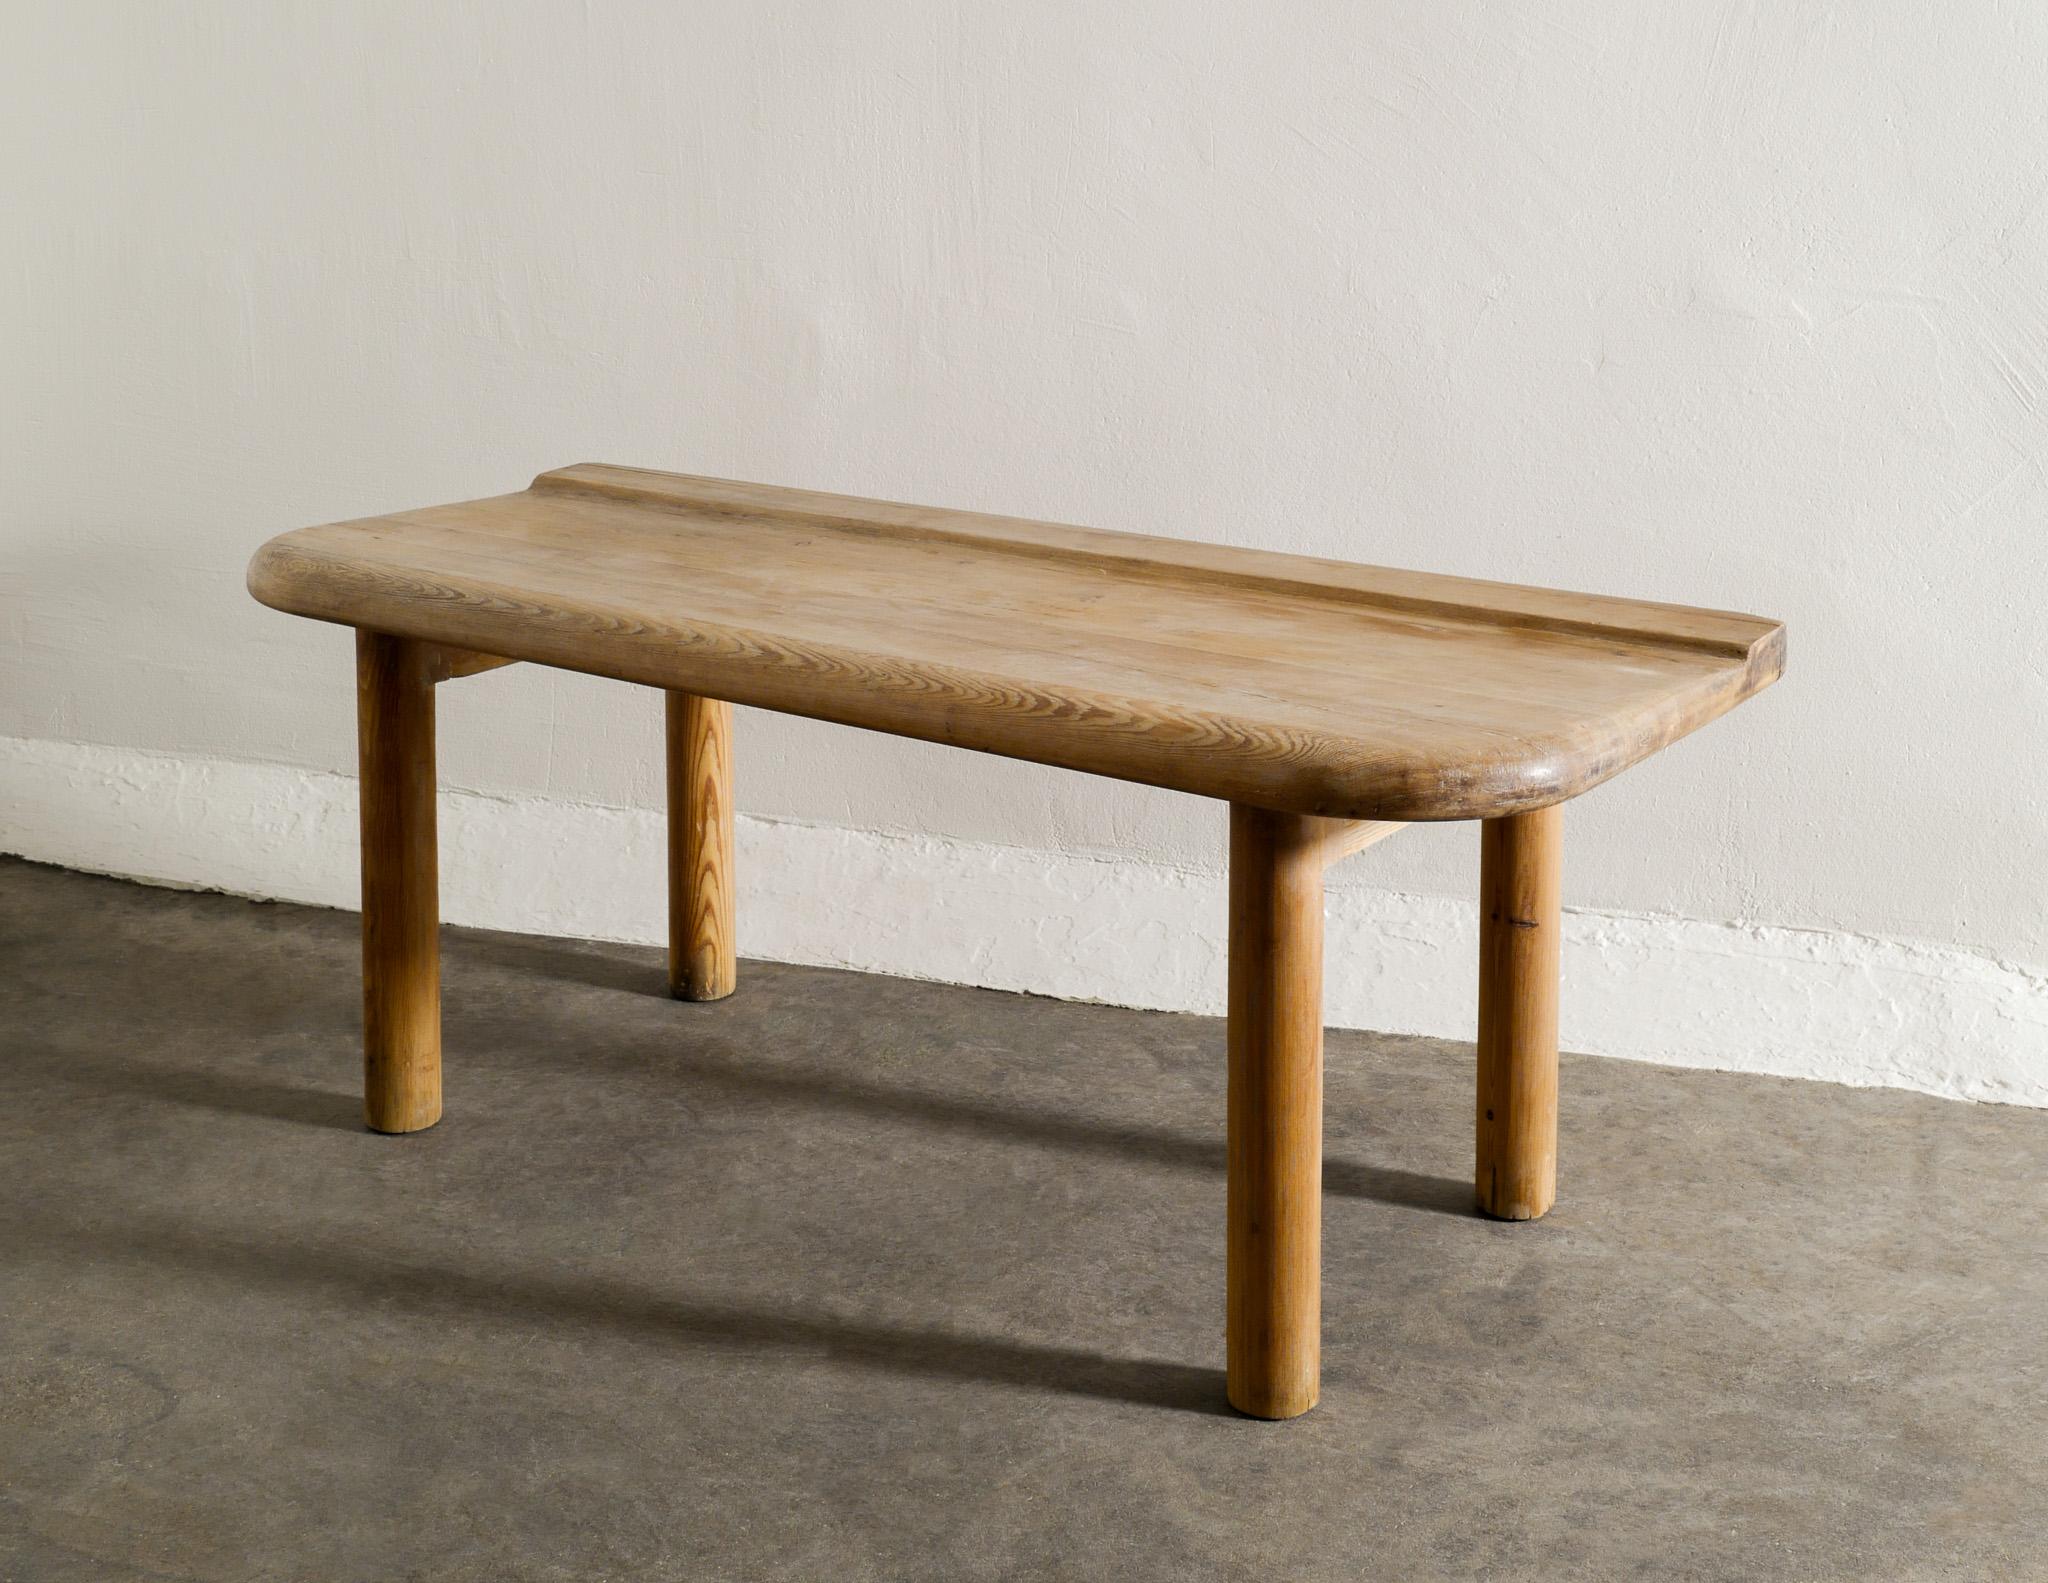 Rare Swedish pine bench produced by anonymous designer in 1930s. In good original condition. The thick round legs reminds a lot of Charlotte Perriand and Pierre Chapo's French mid century works. 

Dimensions: H: 46 cm / 18